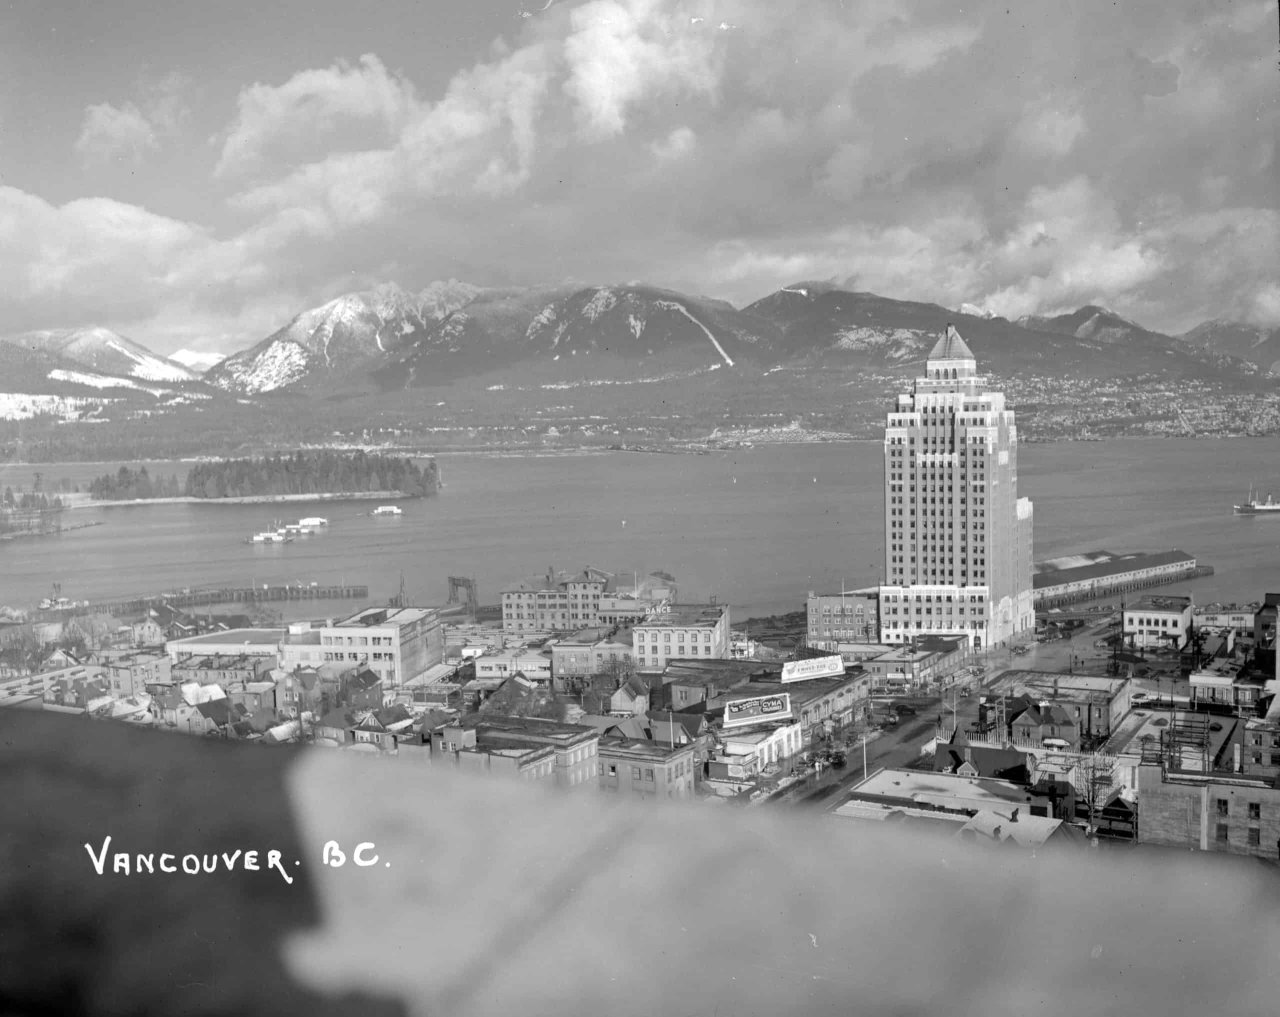 The Marine Building standing out in the Vancouver skyline. City of Vancouver Archives, CVA 298-03.